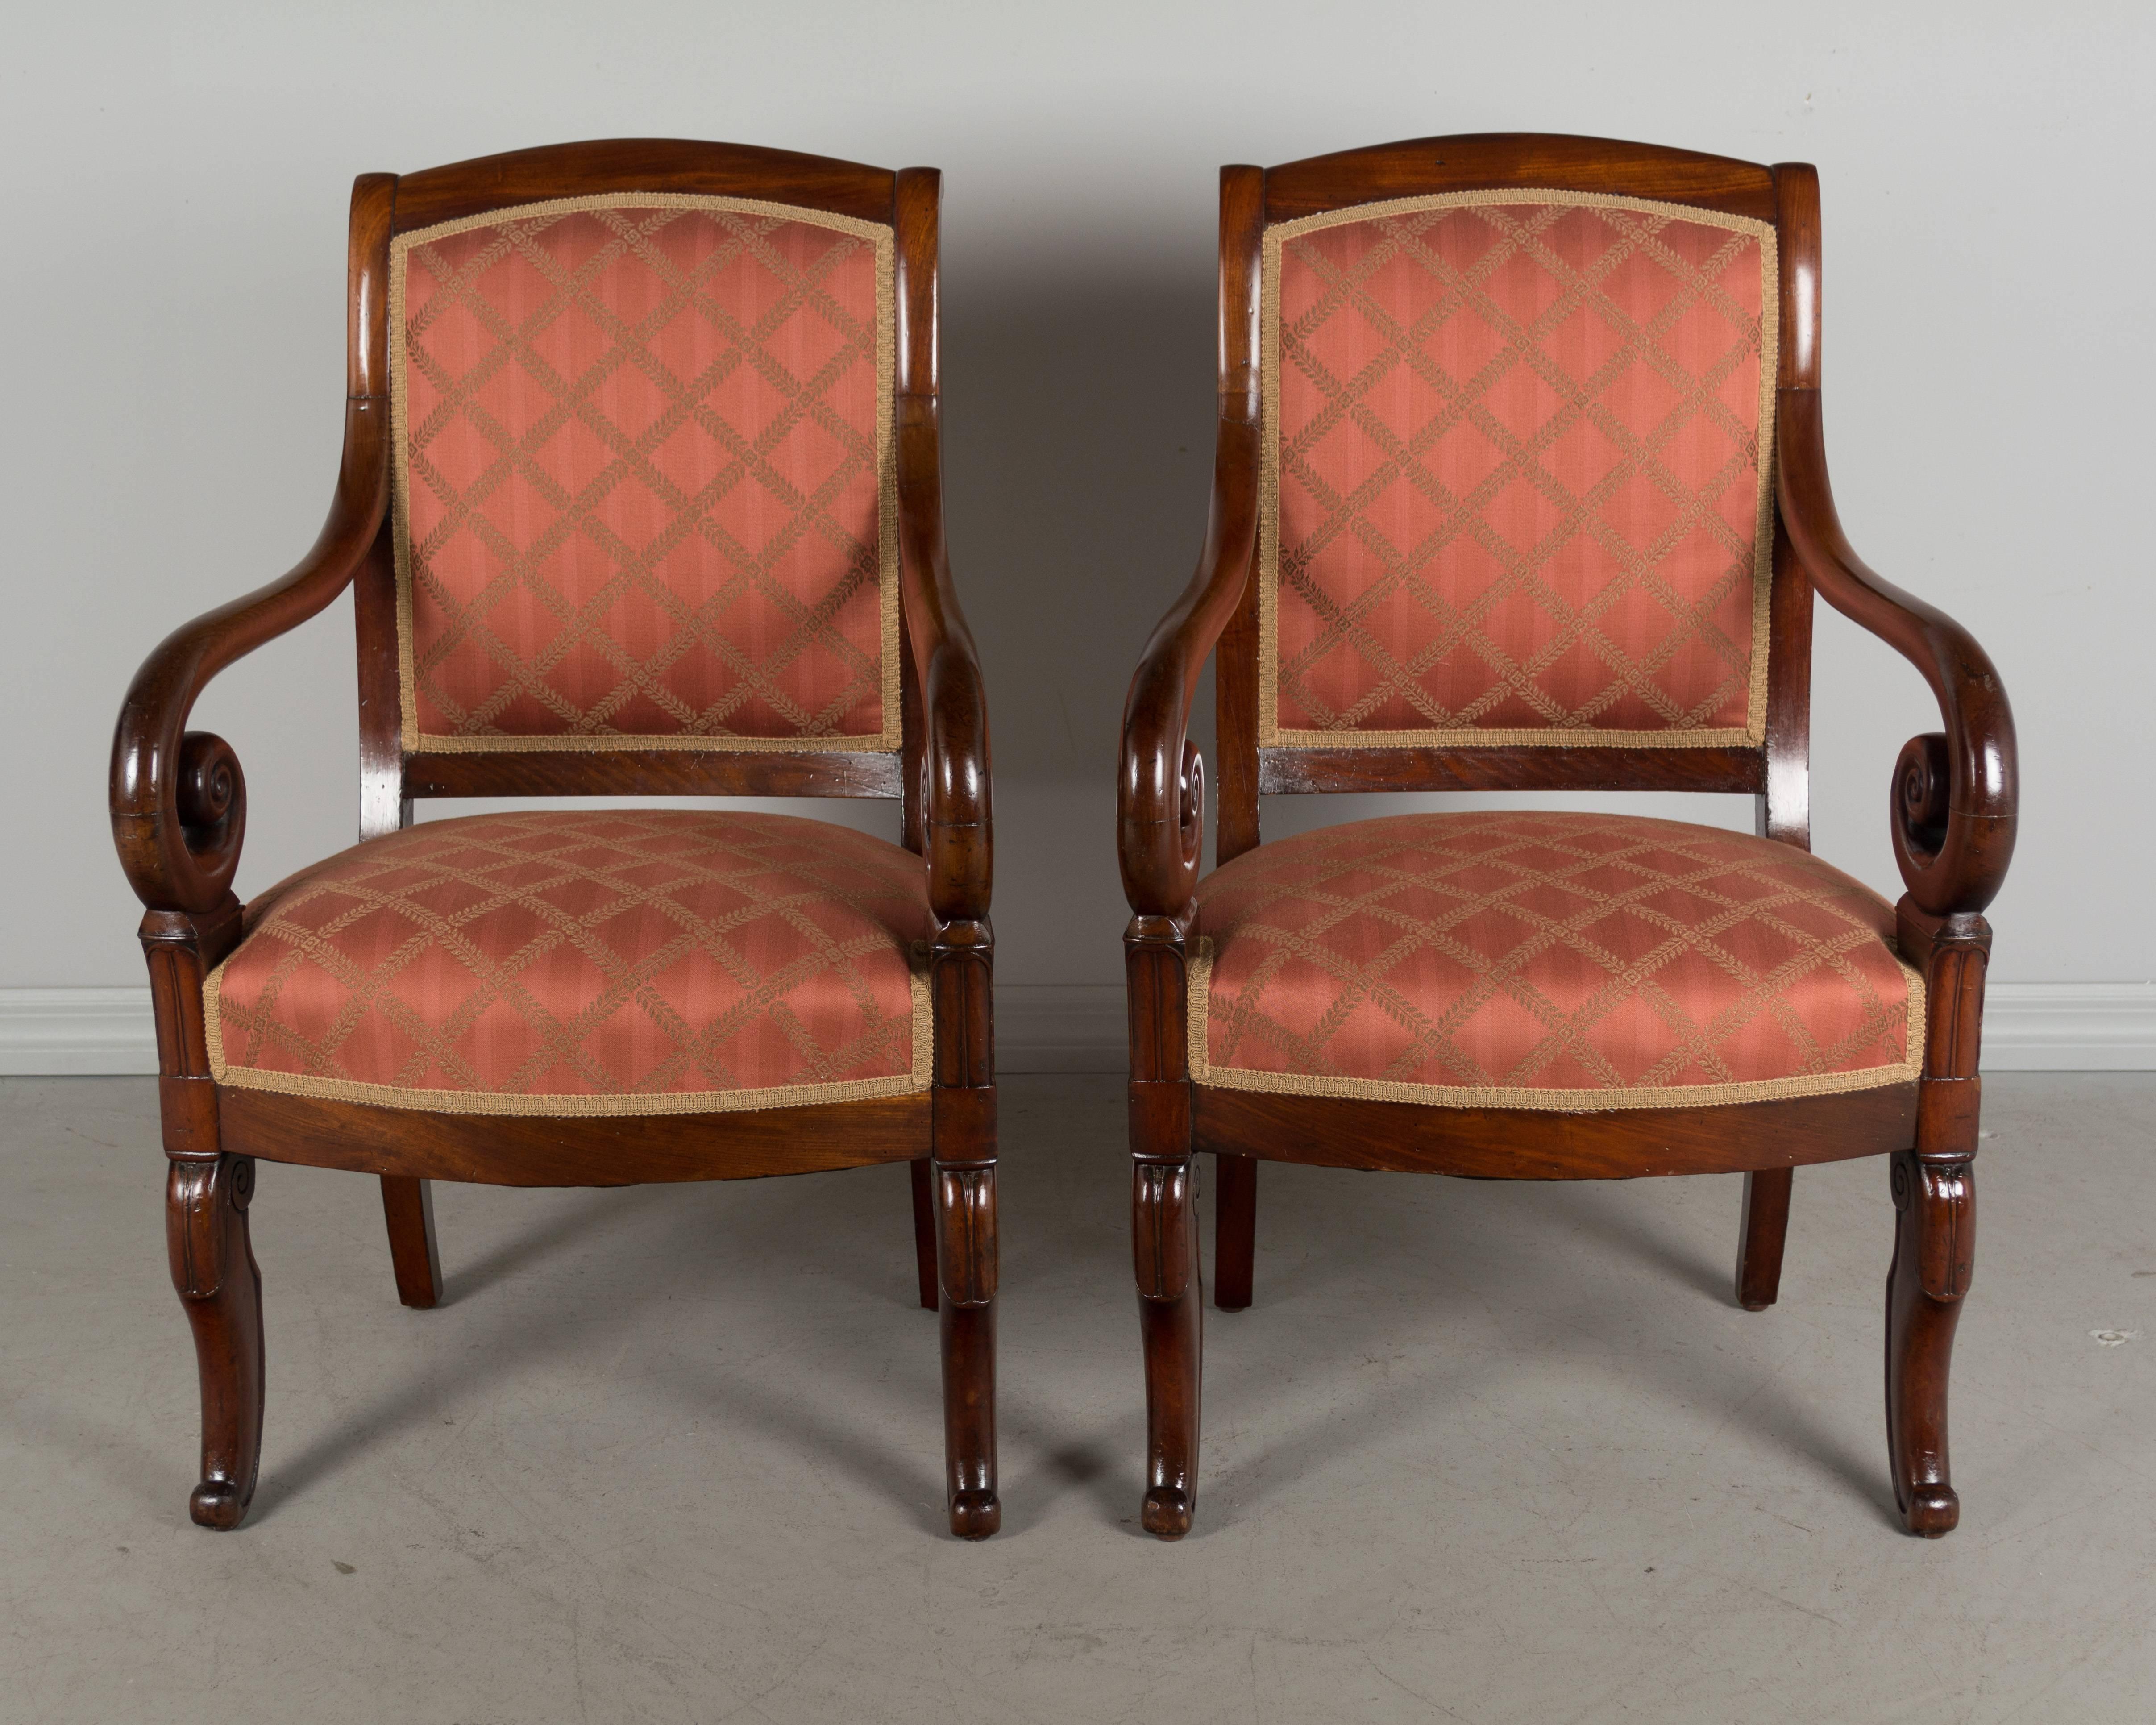 Pair of 19th century French Restauration period armchairs made of solid mahogany with scrolled armrests and subtle carved details on the front legs. French polish finish. Sturdy and comfortable seating. Reupholstered in Beacon Hill fabric.
More